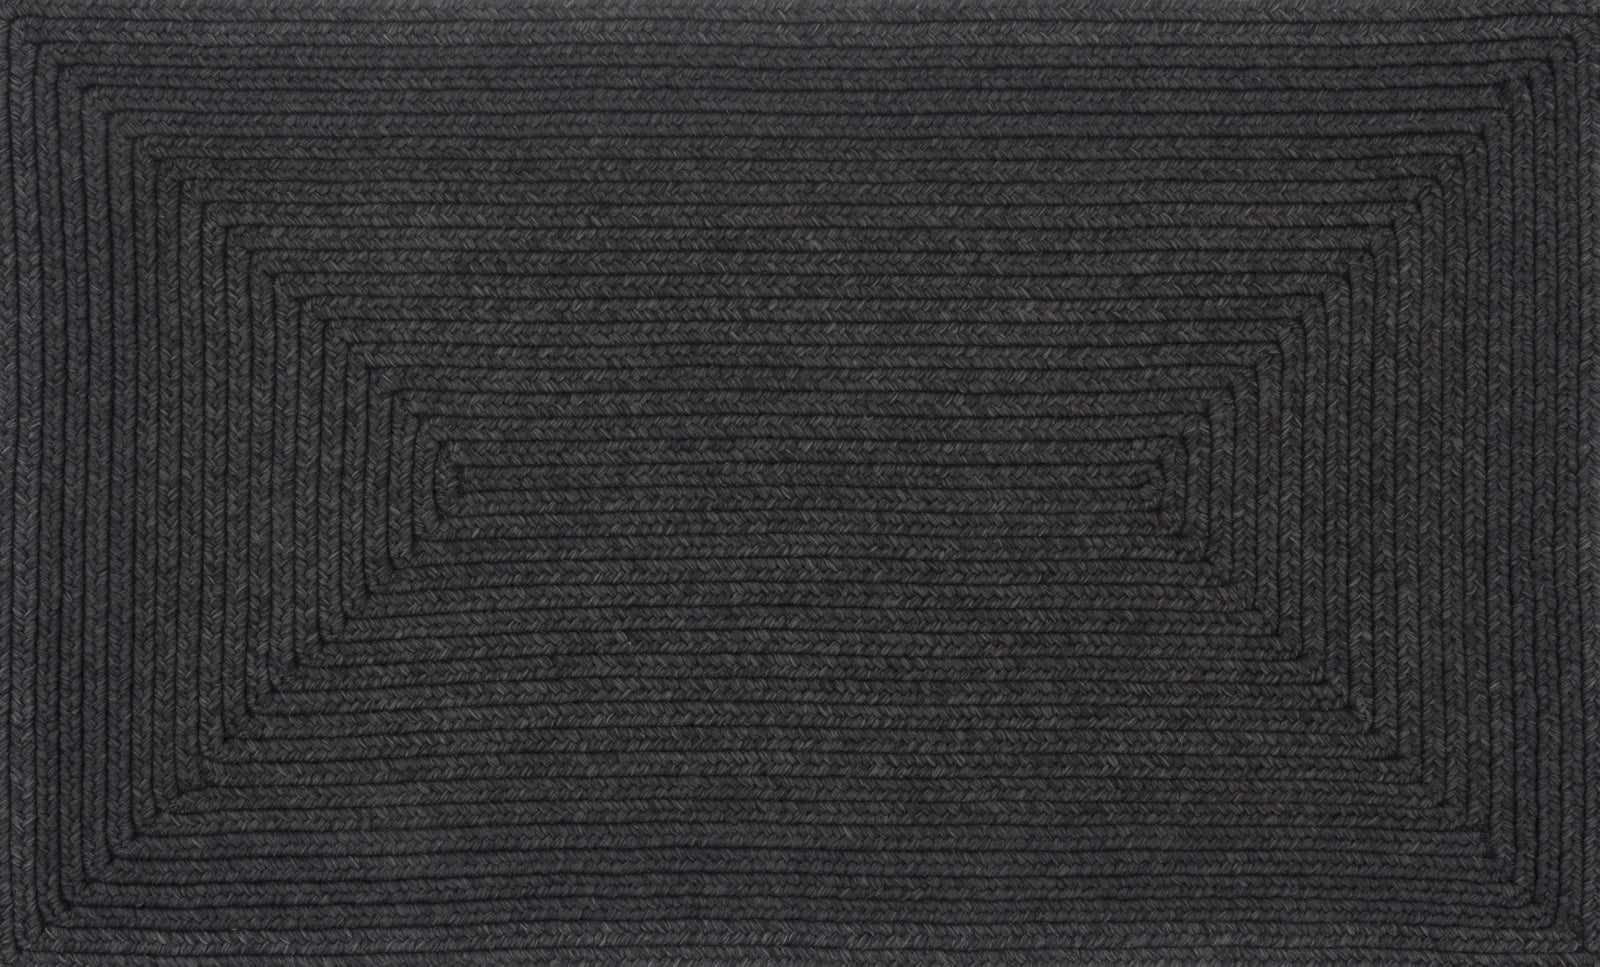 Loloi II Charcoal Braided Indoor/Outdoor Area Rug G7071 Charcoal/Charcoal main image